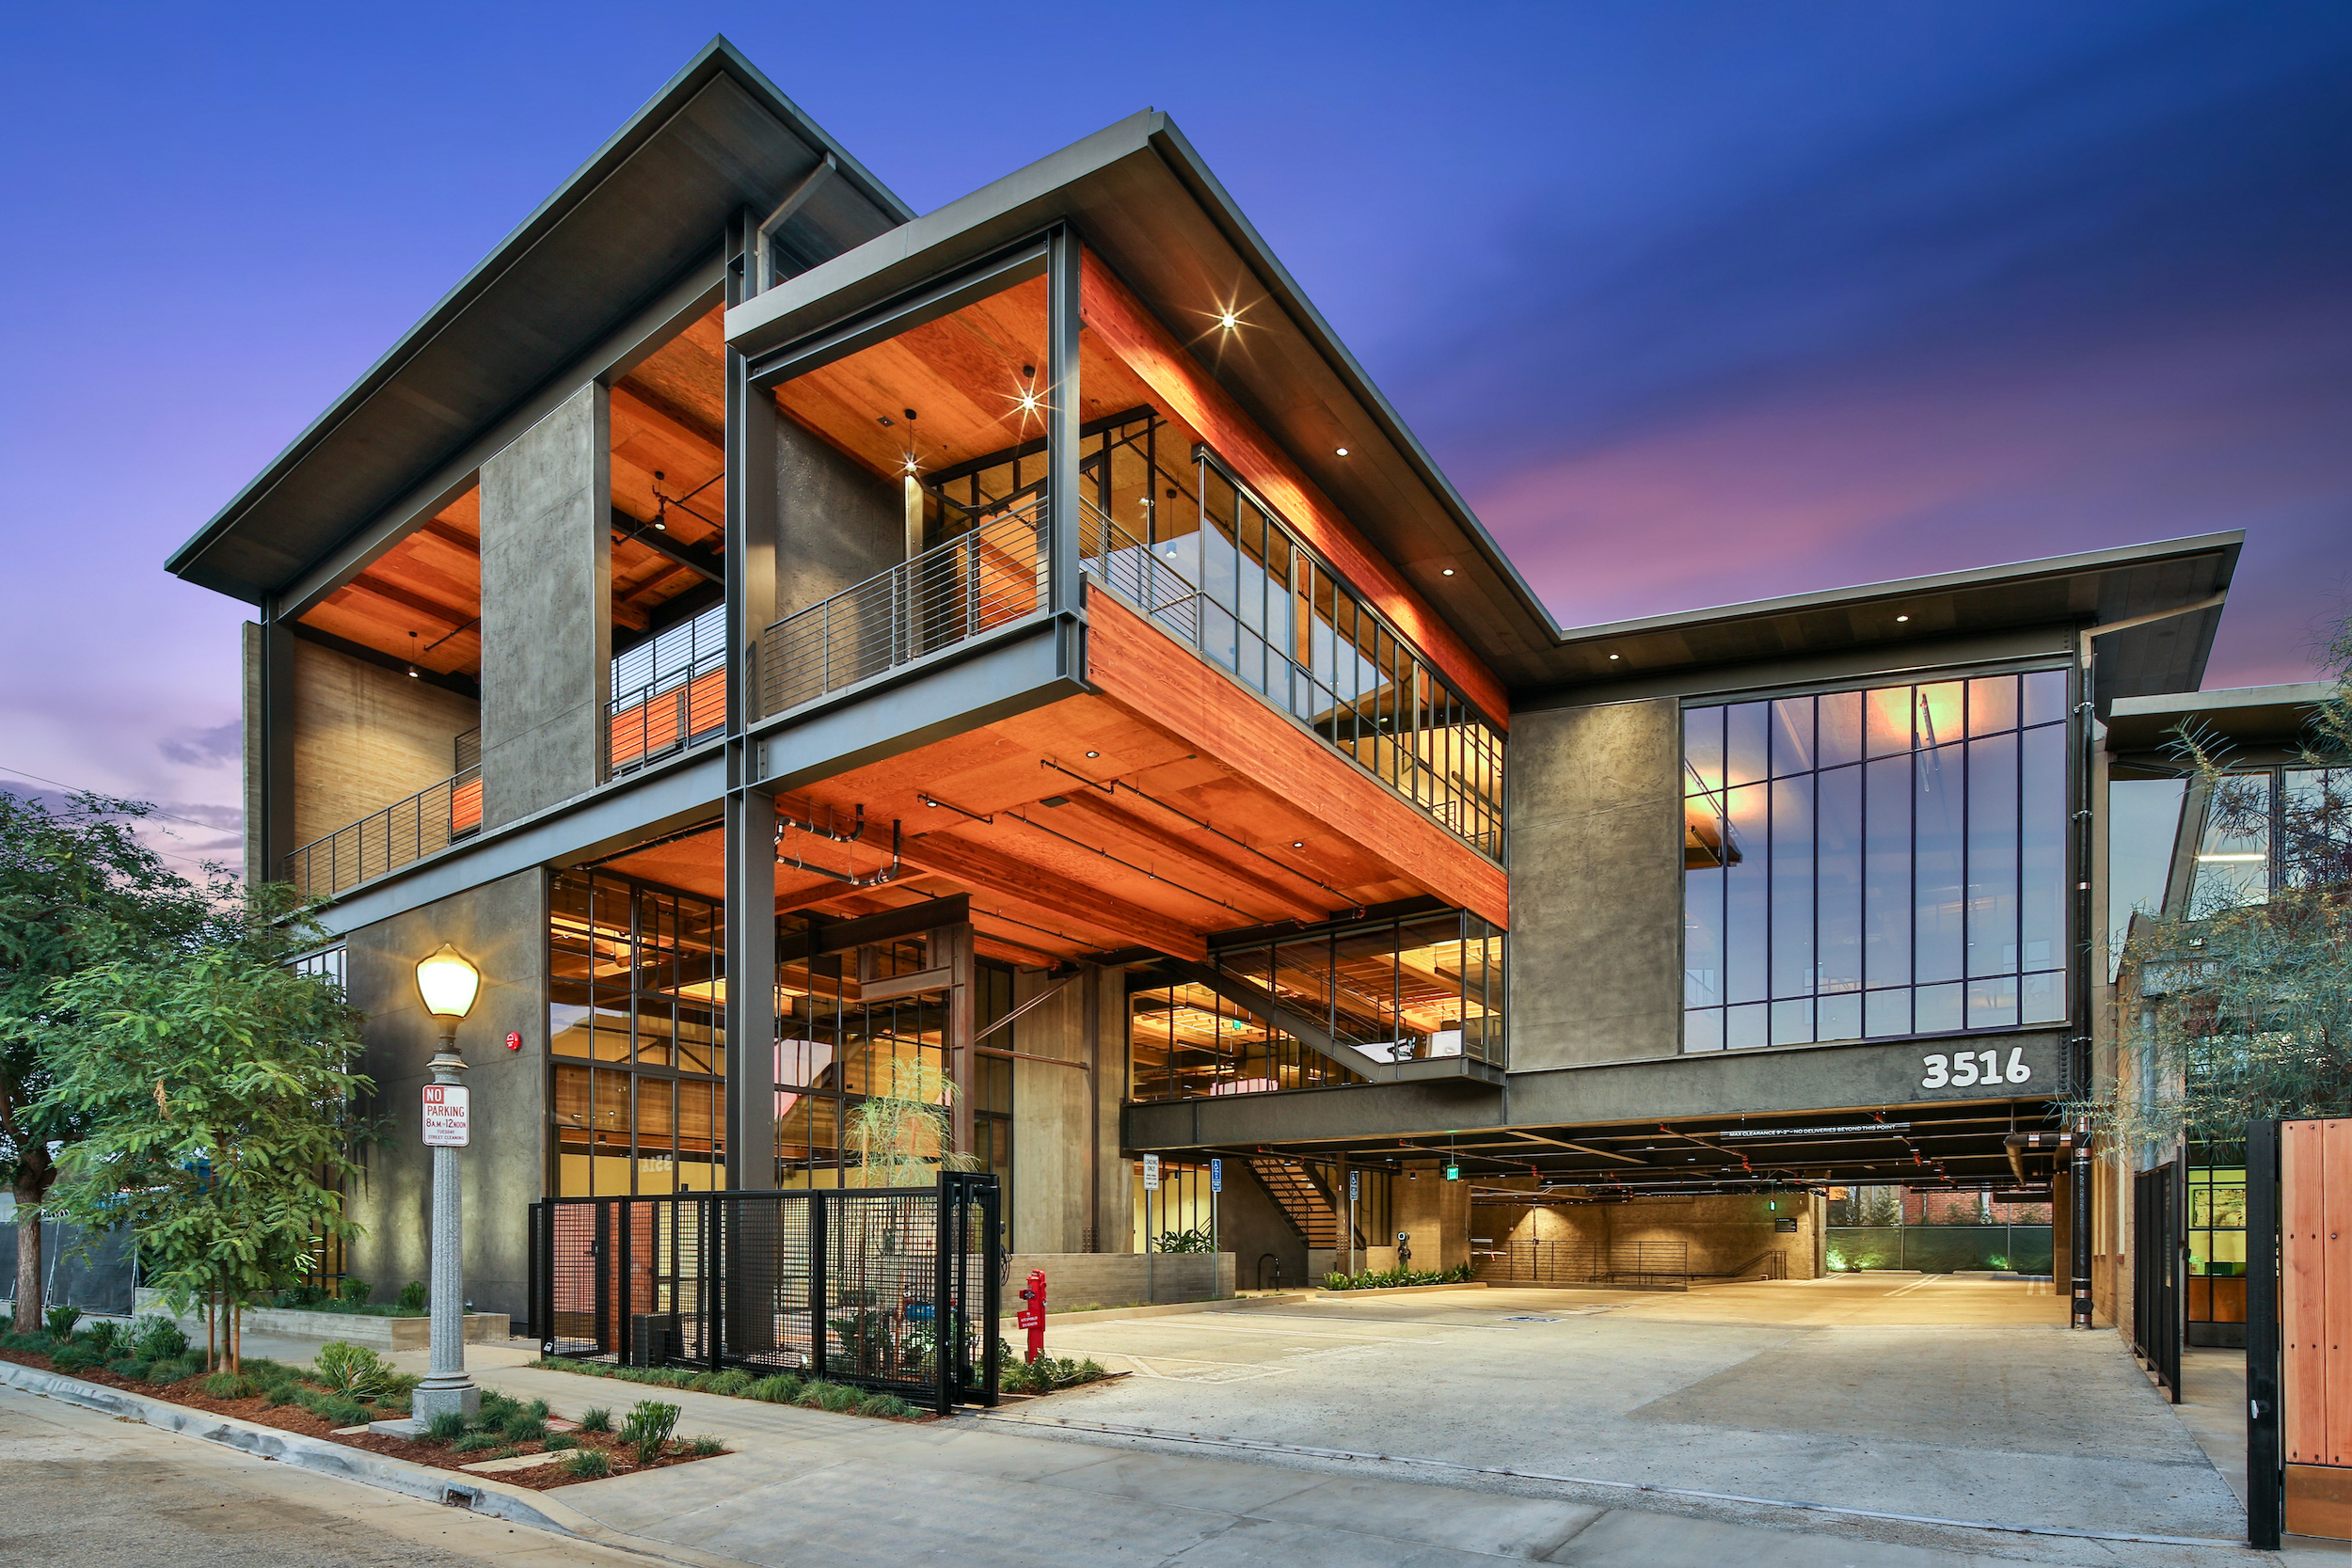 In Southern California, a former industrial zone continues to revitalize with an award-winning office property. Photo: Patrick Tang, Take Flyt Imaging